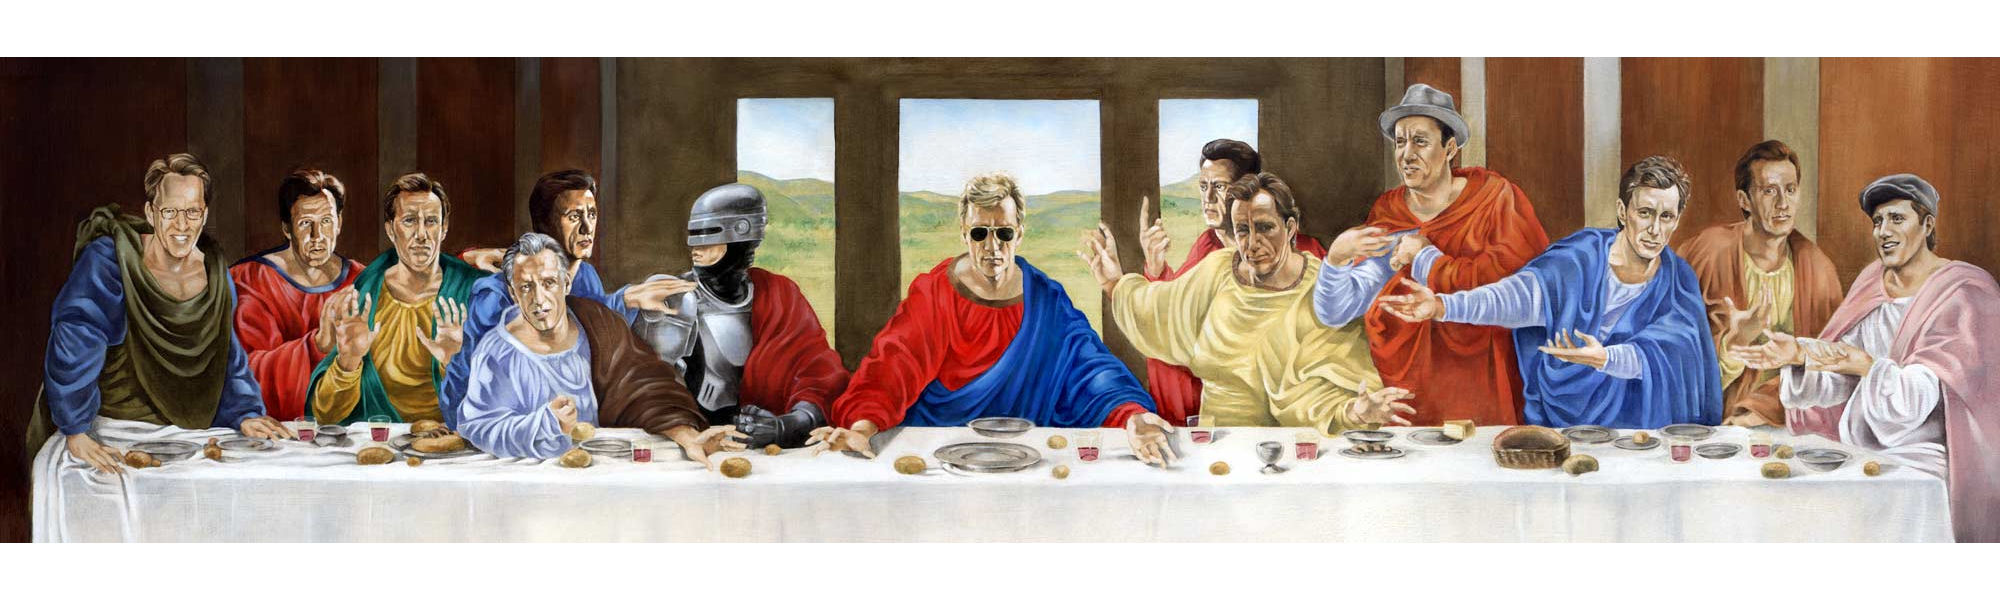 The Last Supper 2000x600